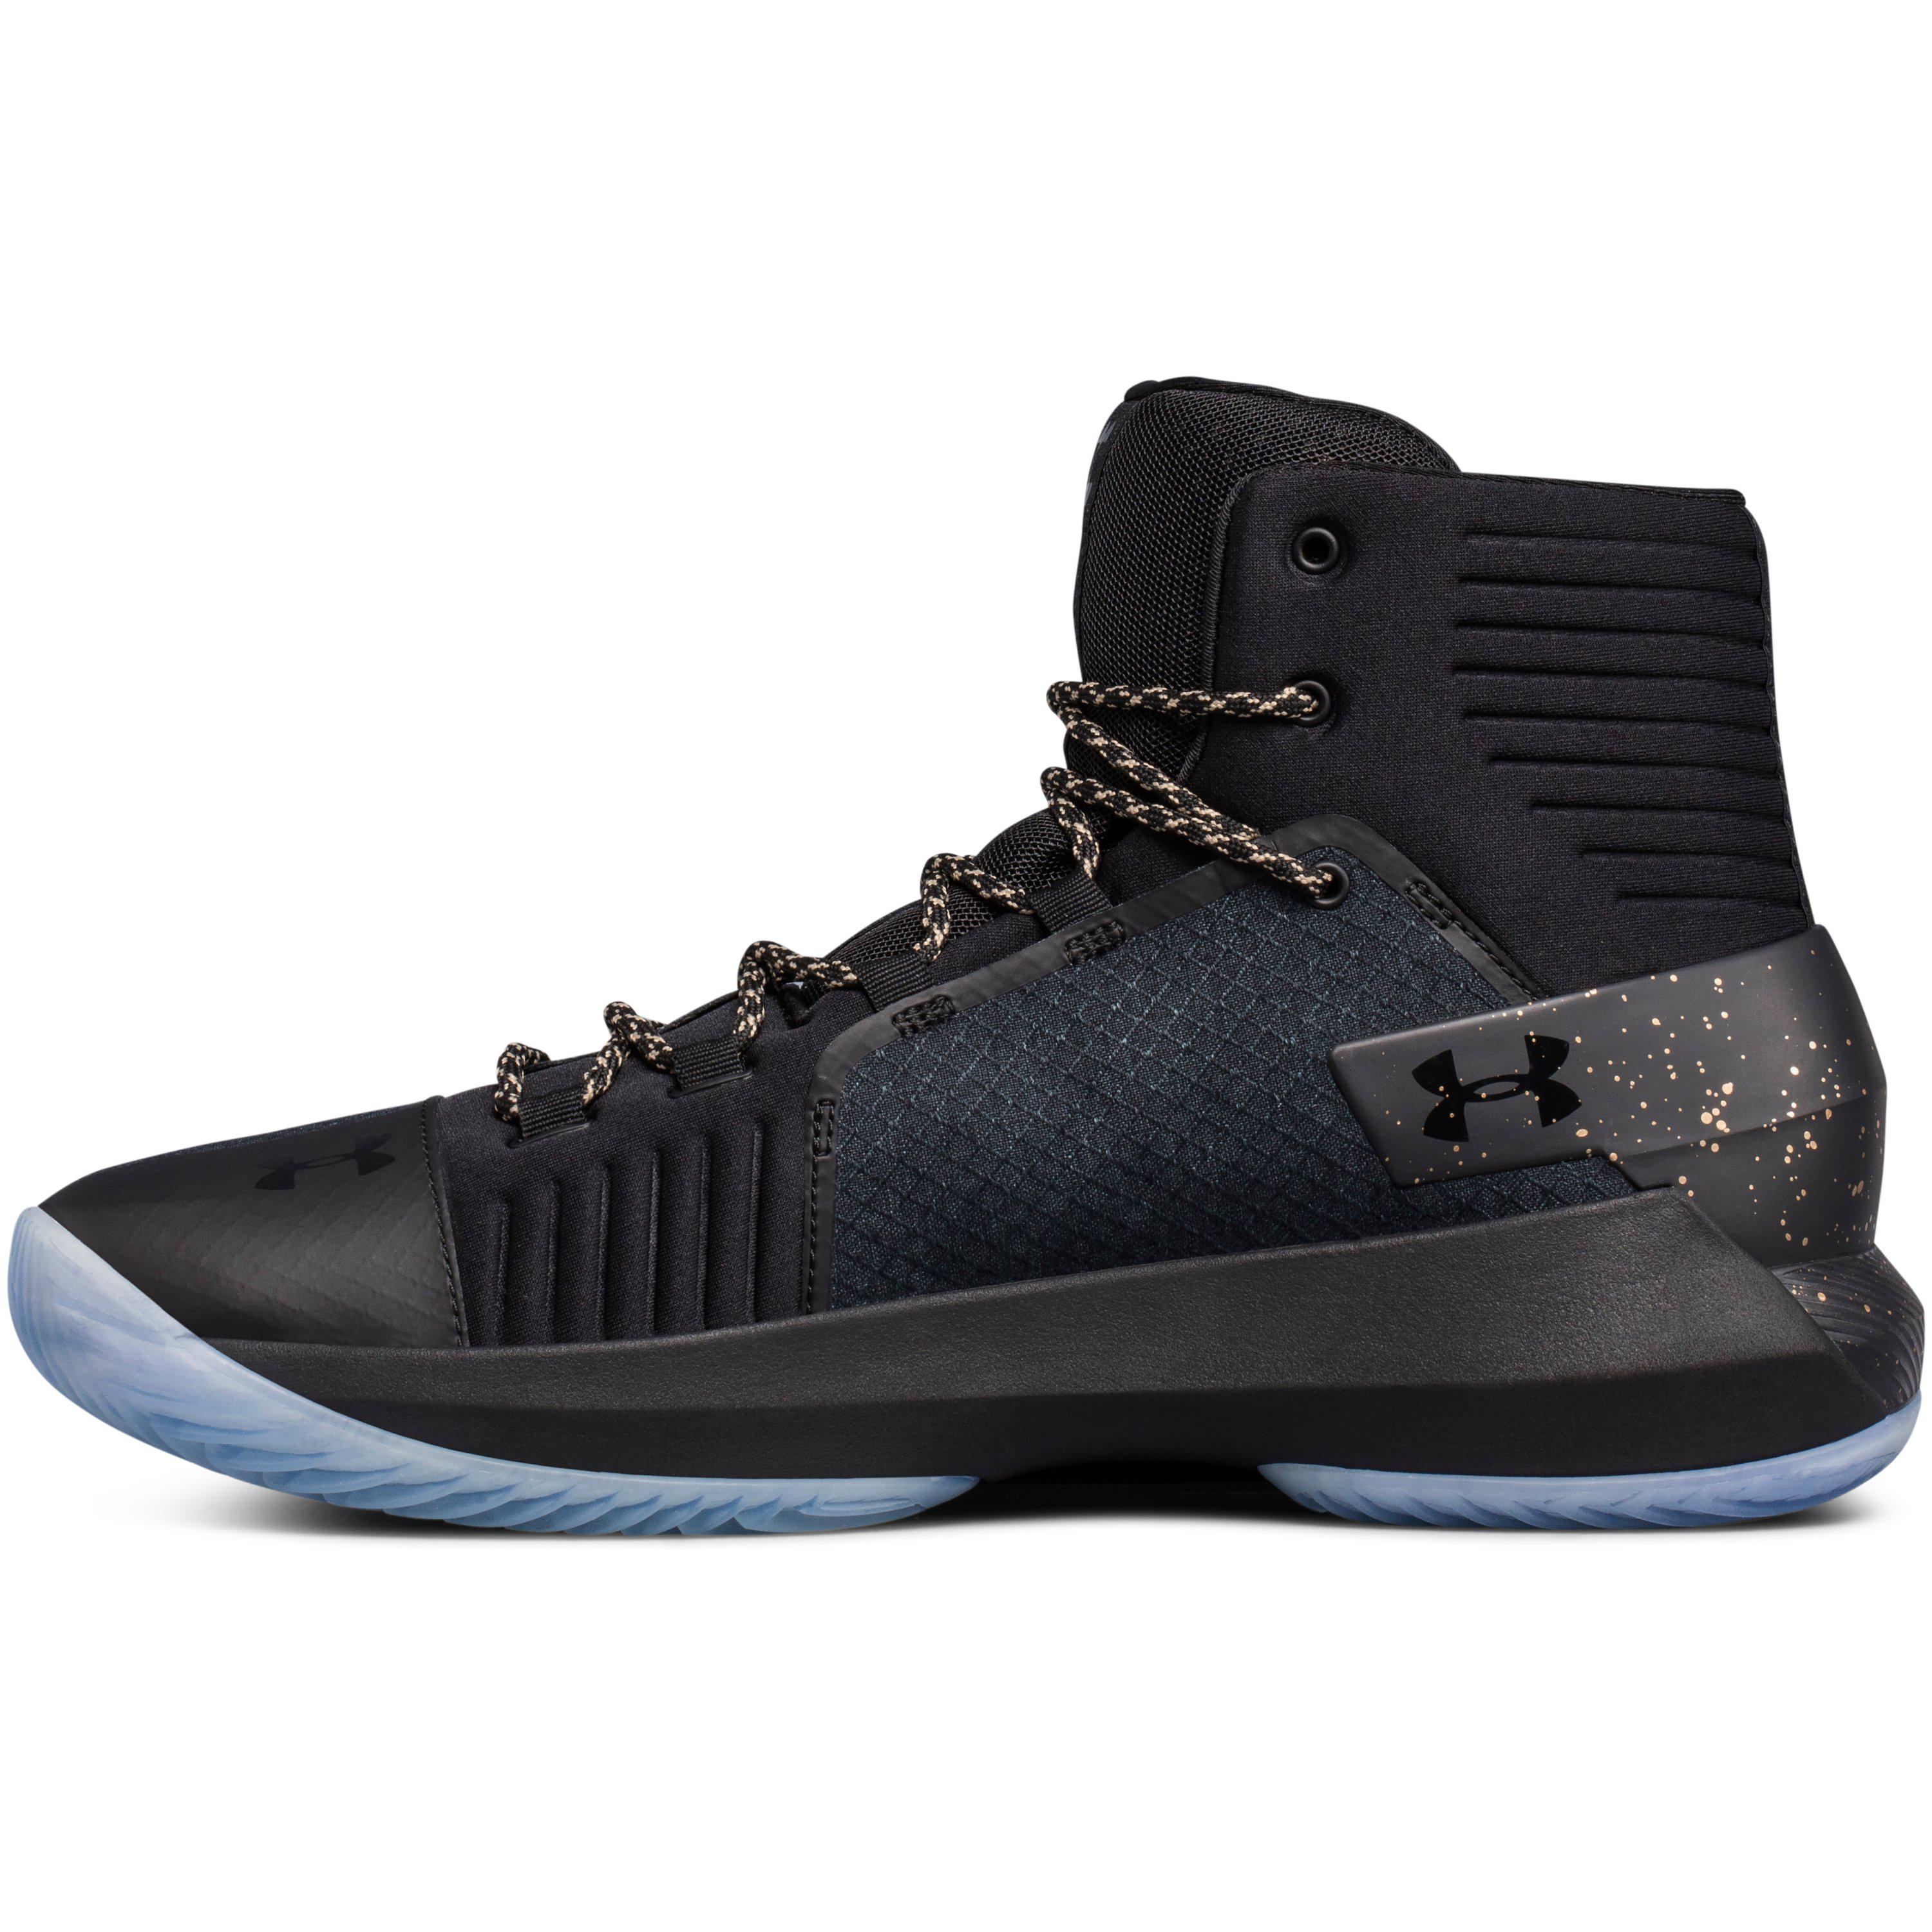 under armour drive 4 basketball shoes